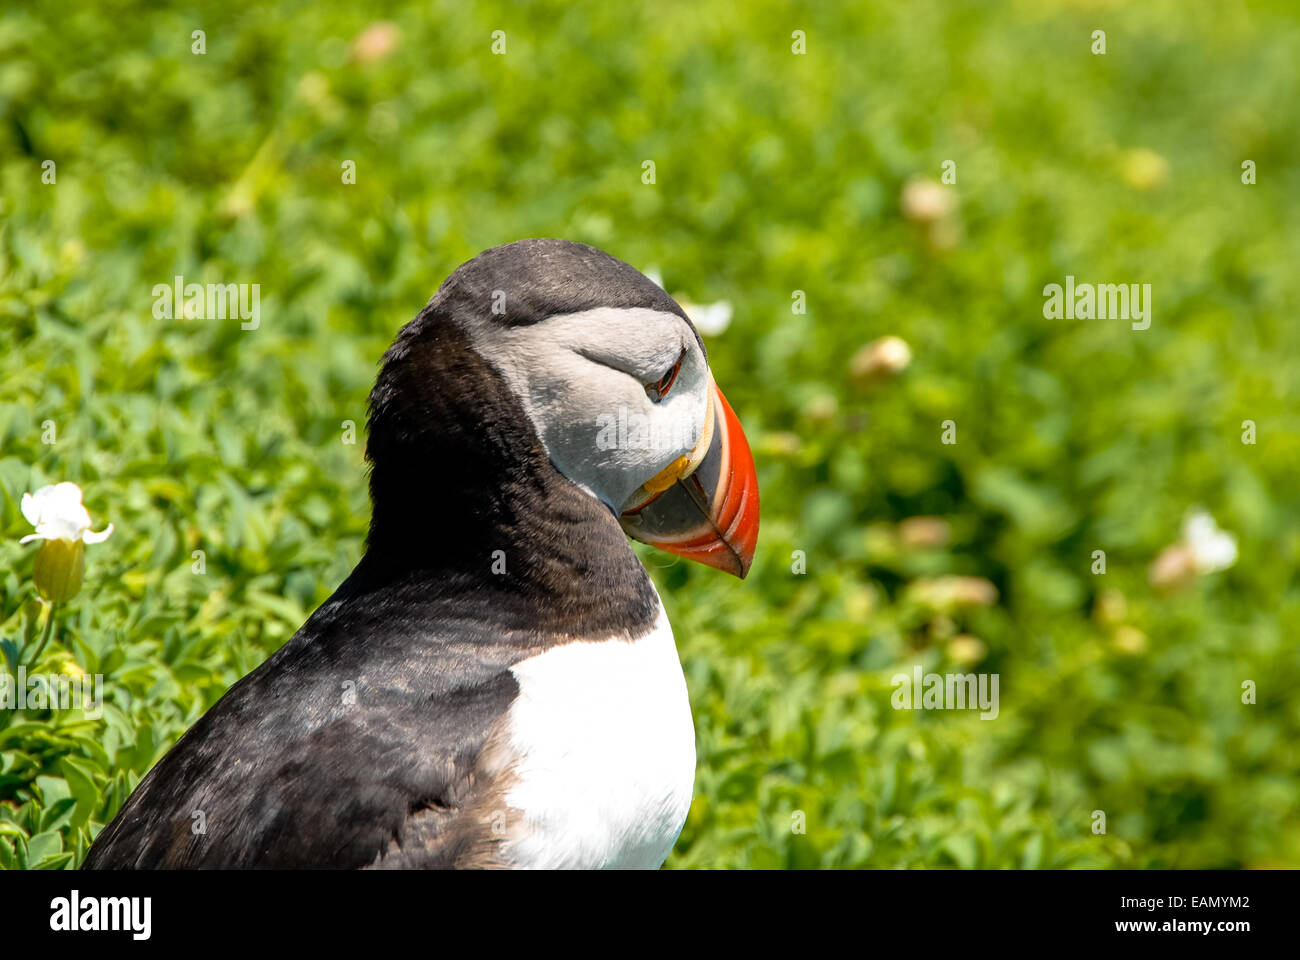 puffin at skellig michael island in ireland Stock Photo